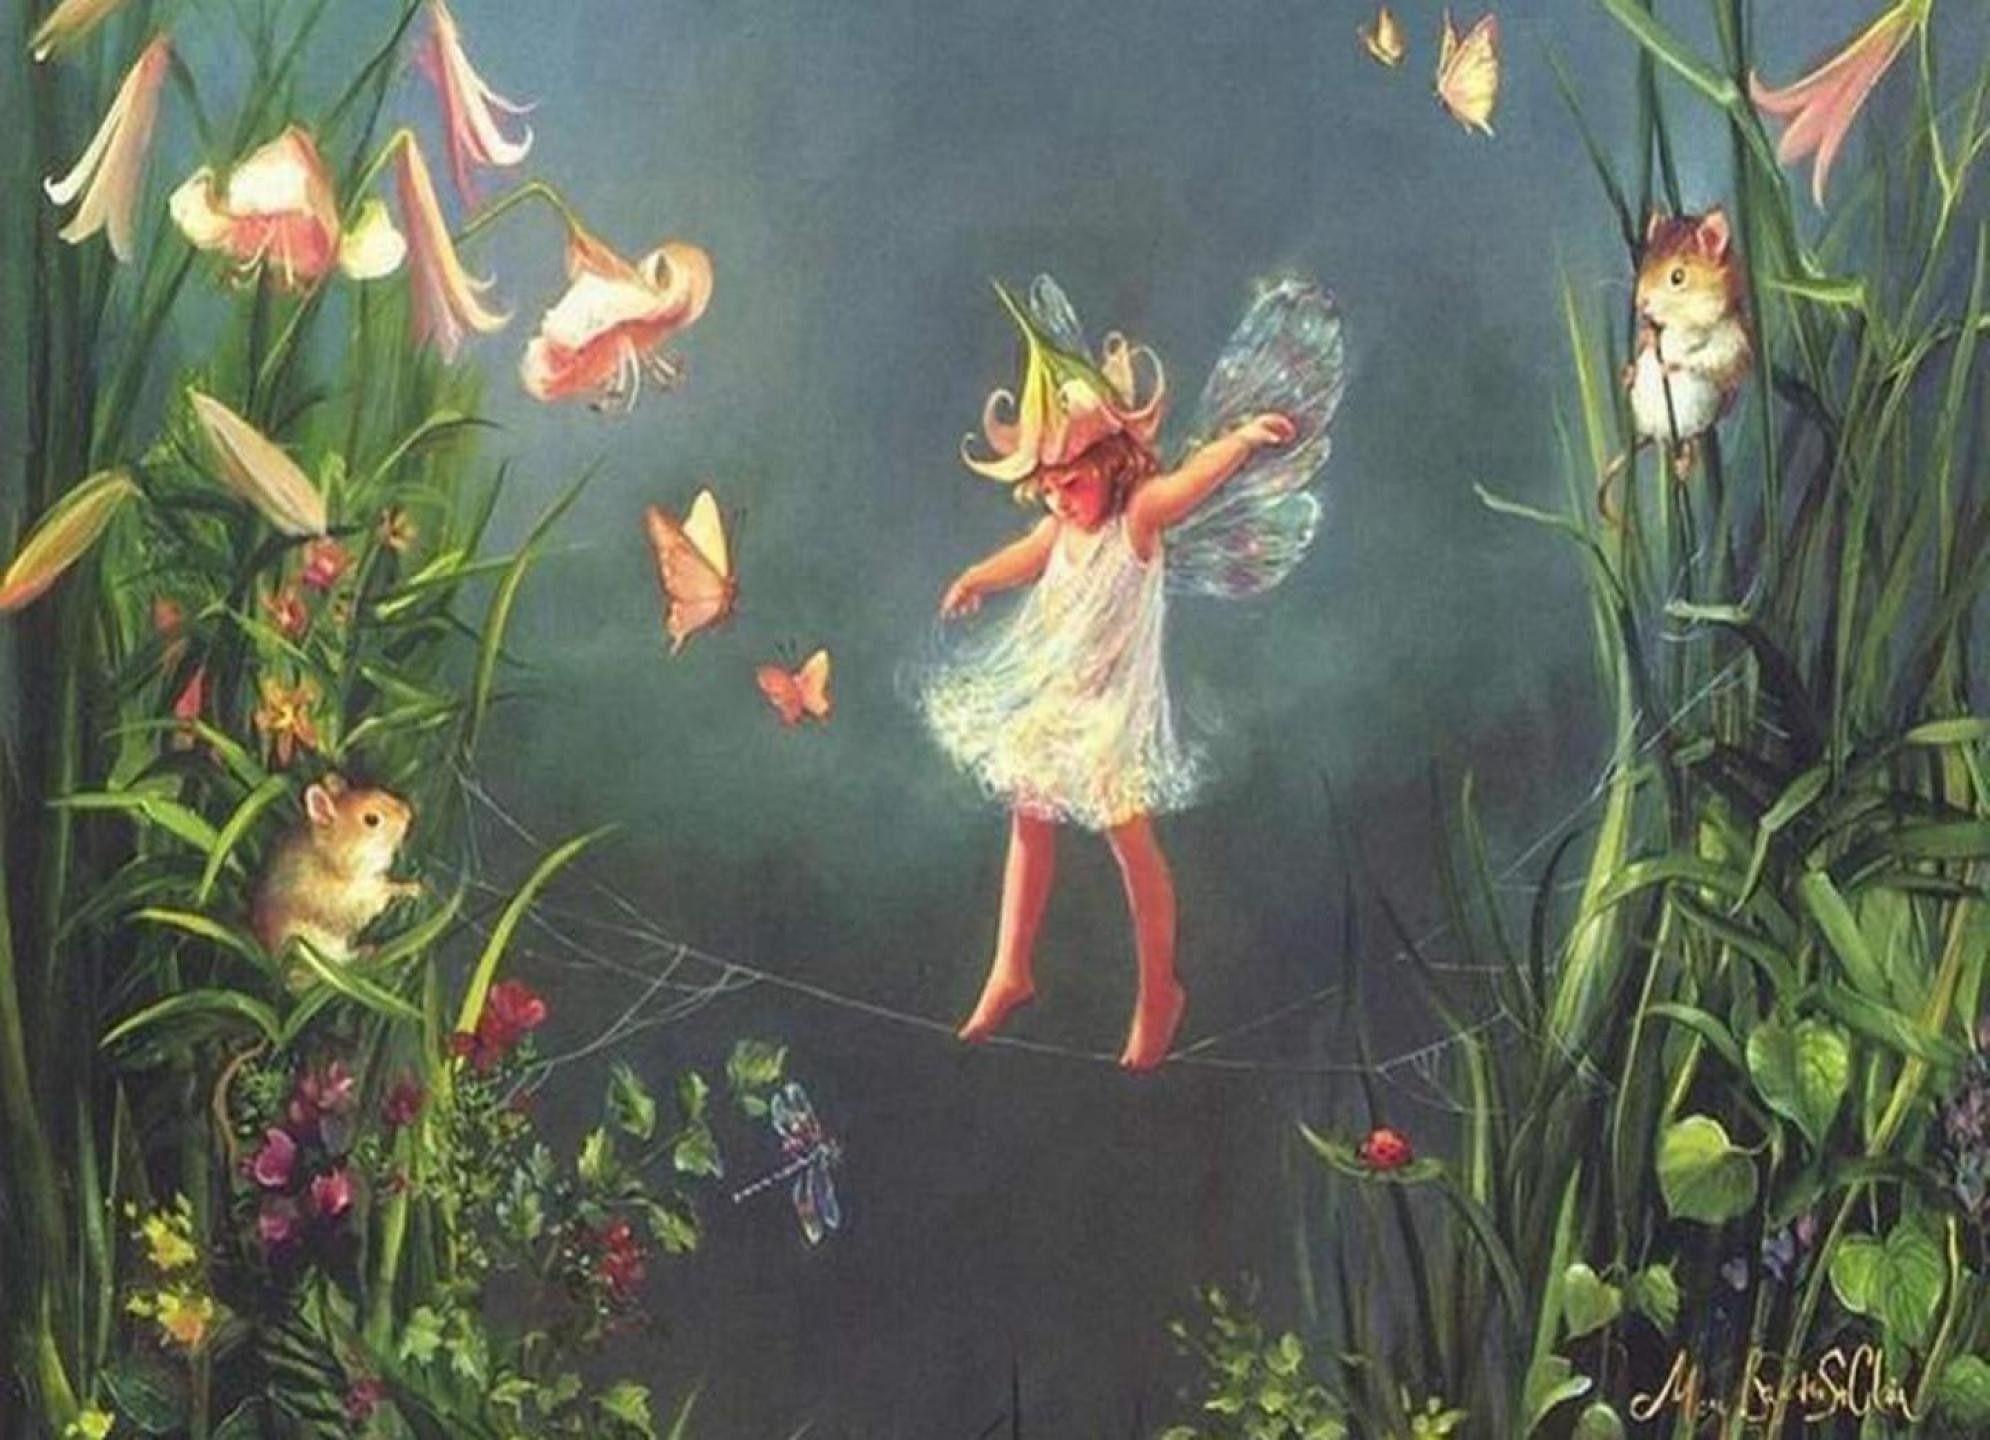 Fairy Aesthetic Wallpapers - Top Free Fairy Aesthetic Backgrounds